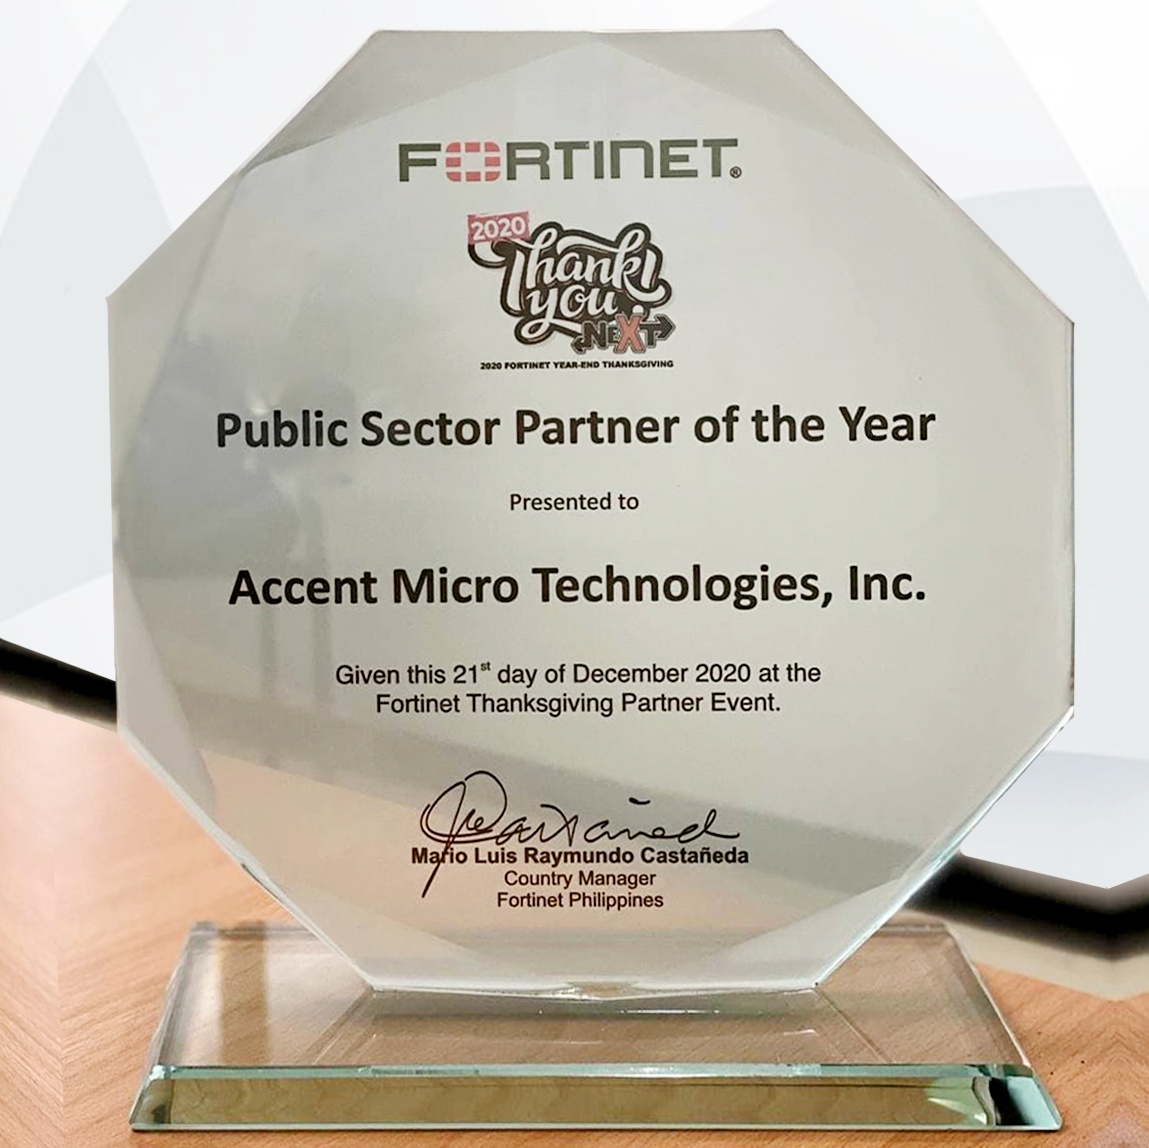 AMTI won the Fortinet's Public Sector Partner of the Year